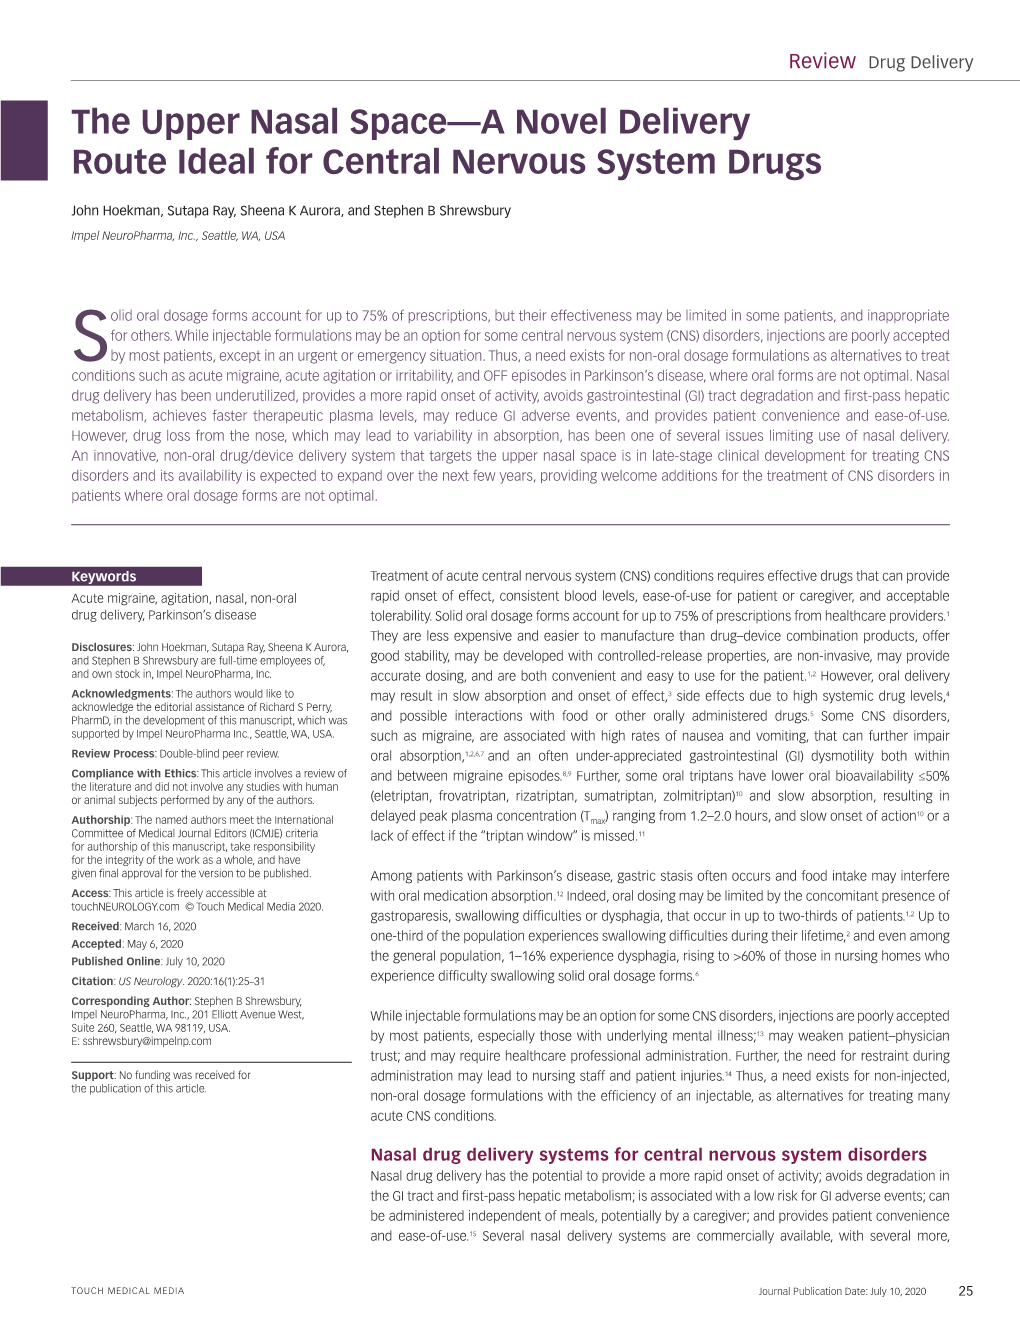 The Upper Nasal Space—A Novel Delivery Route Ideal for Central Nervous System Drugs